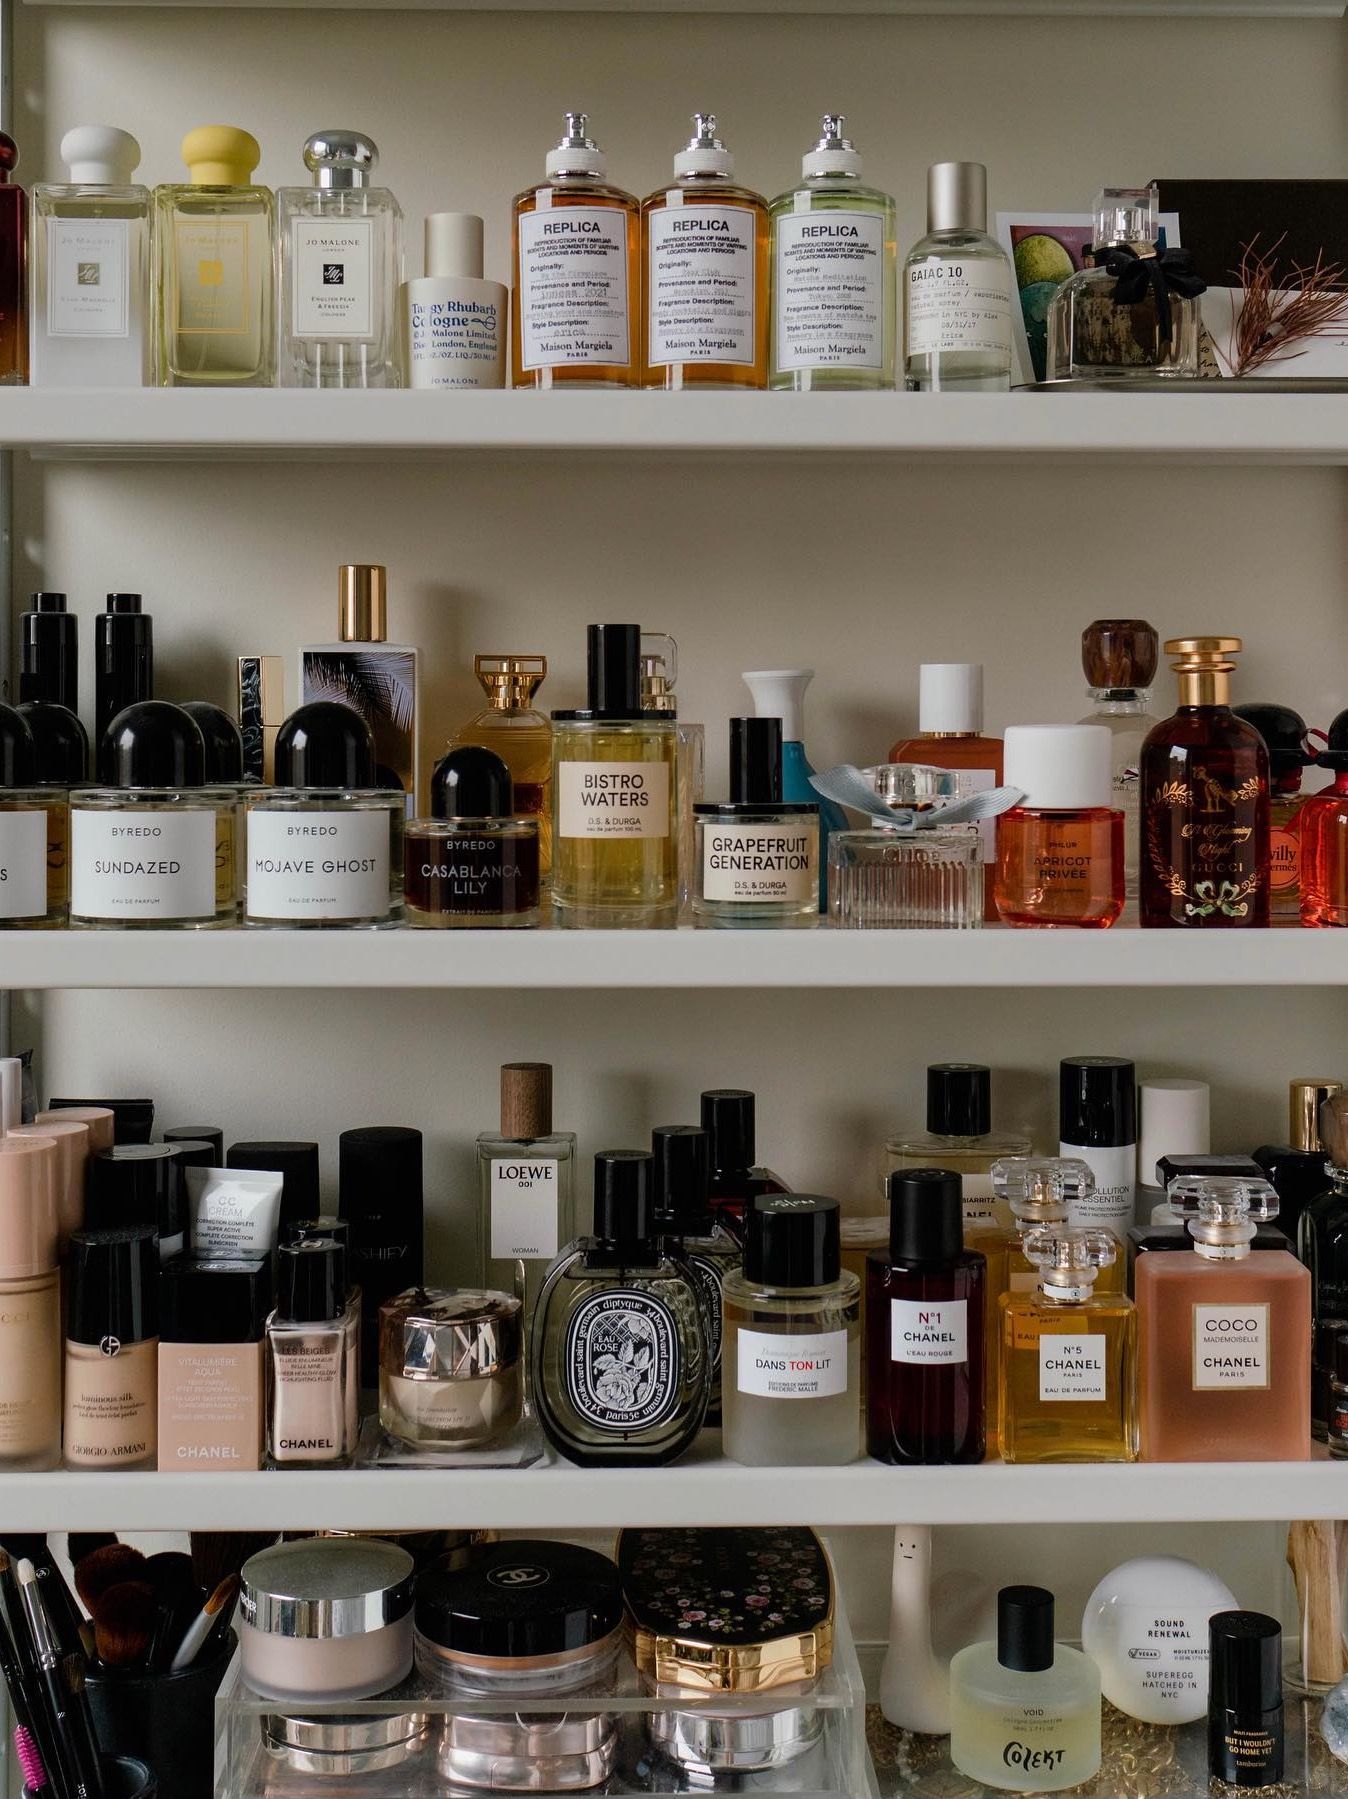 And Now, Our List of the Best Perfumes of All Time